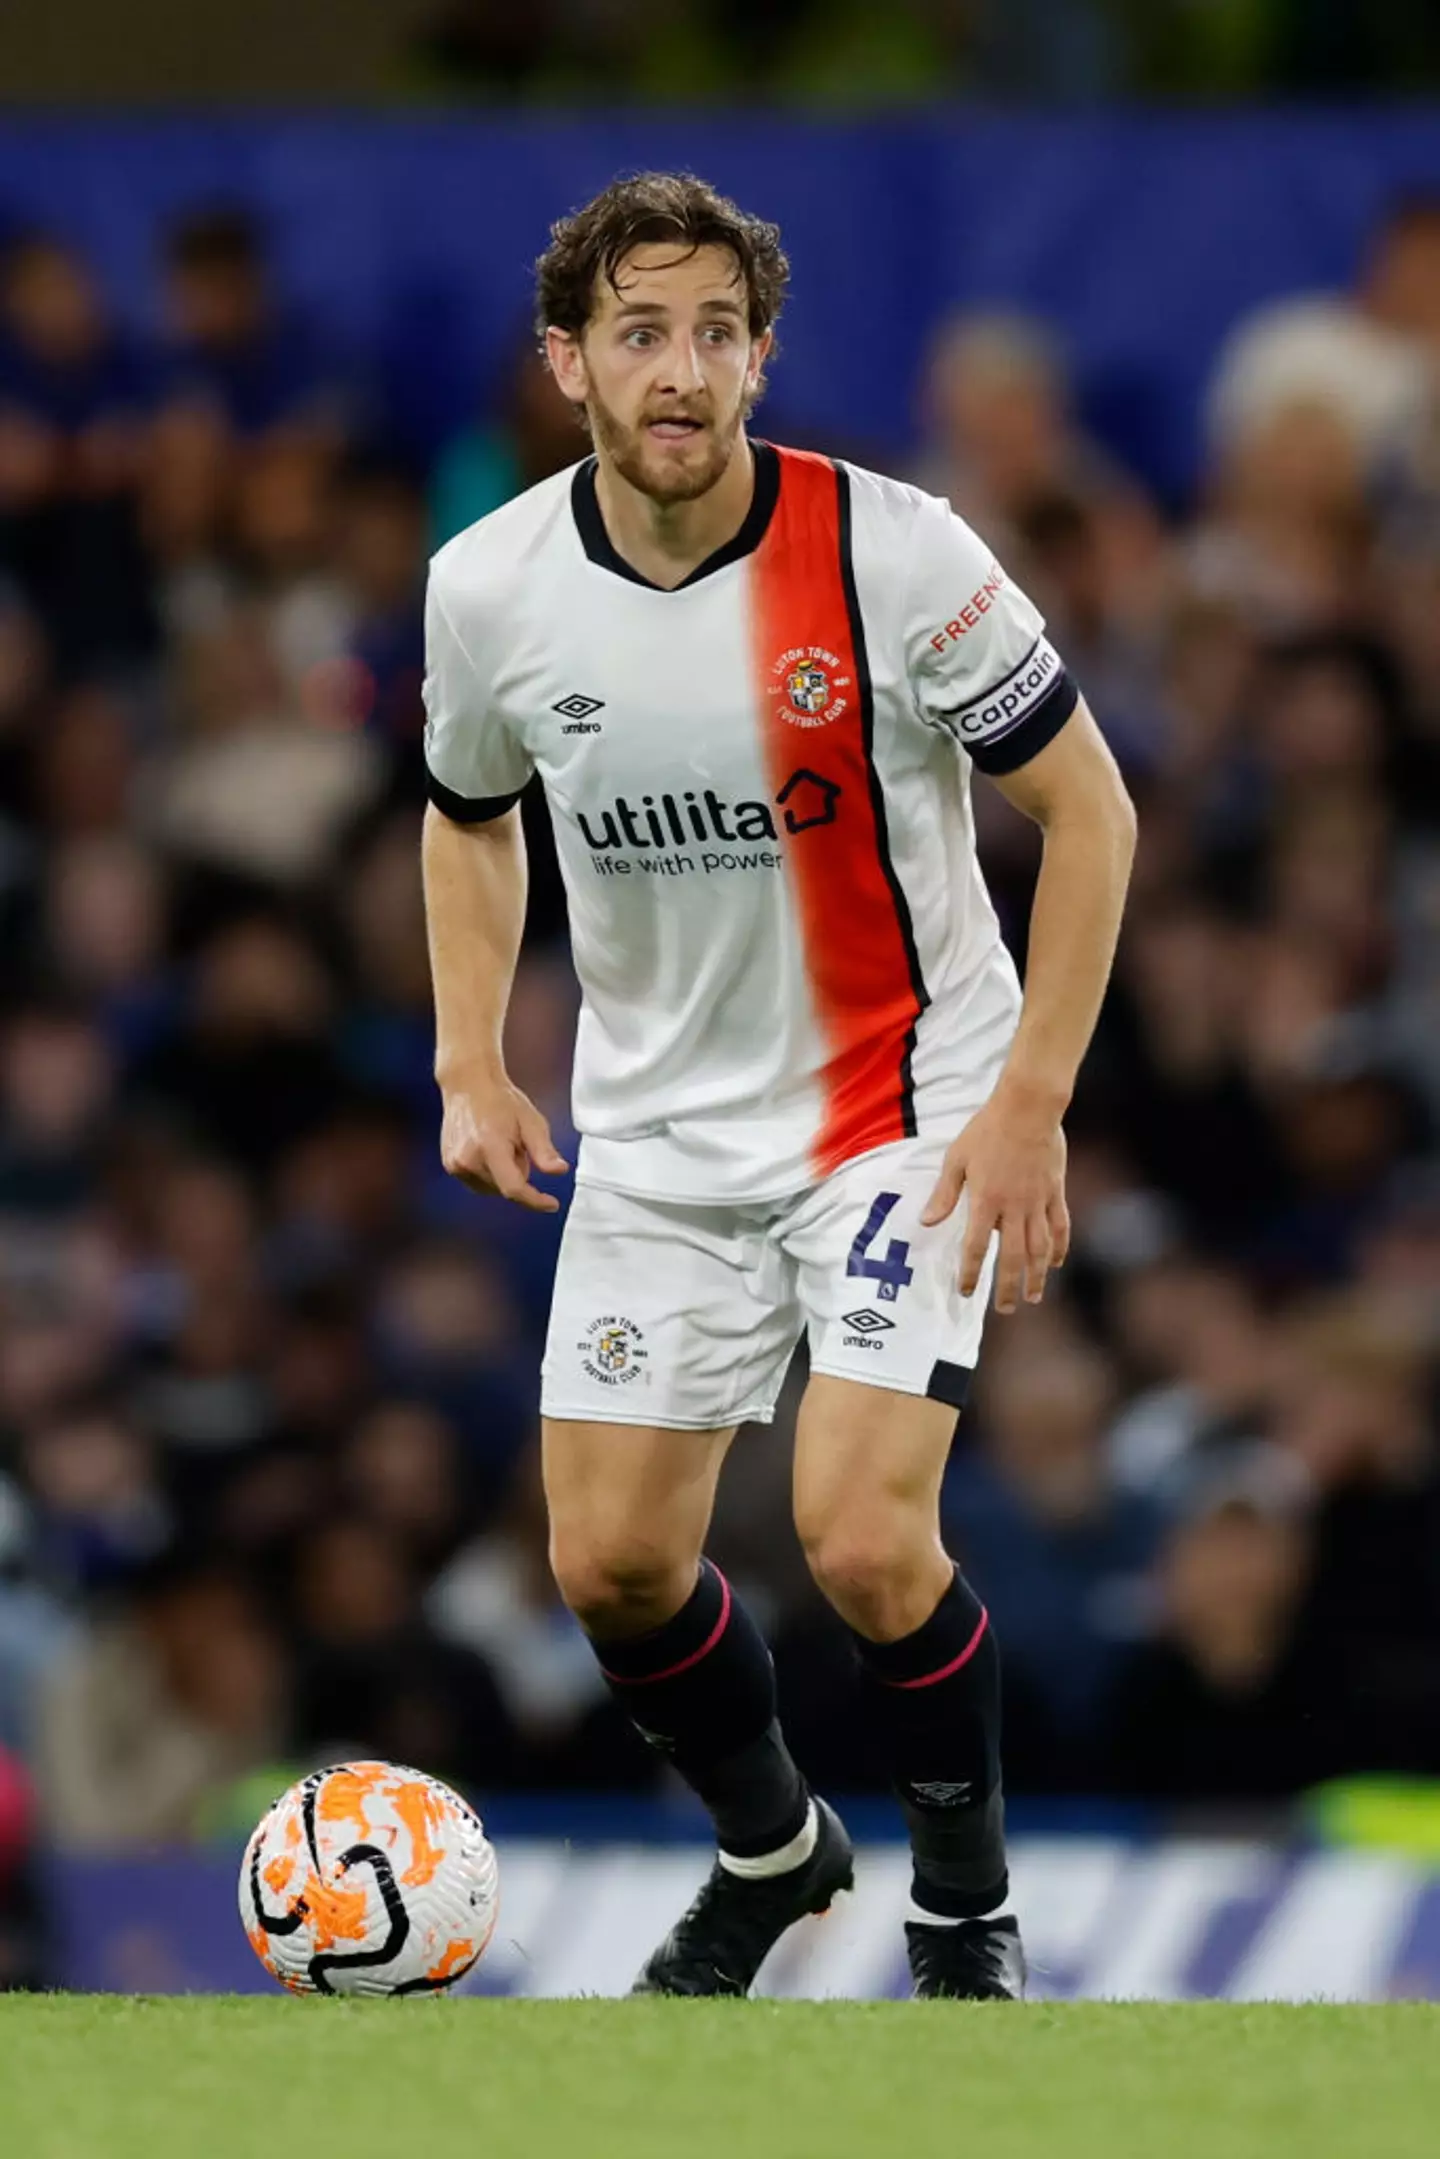 Luton defender Tom Lockyer appeared to collapse on the pitch today in an away game against AFC Bournemouth.